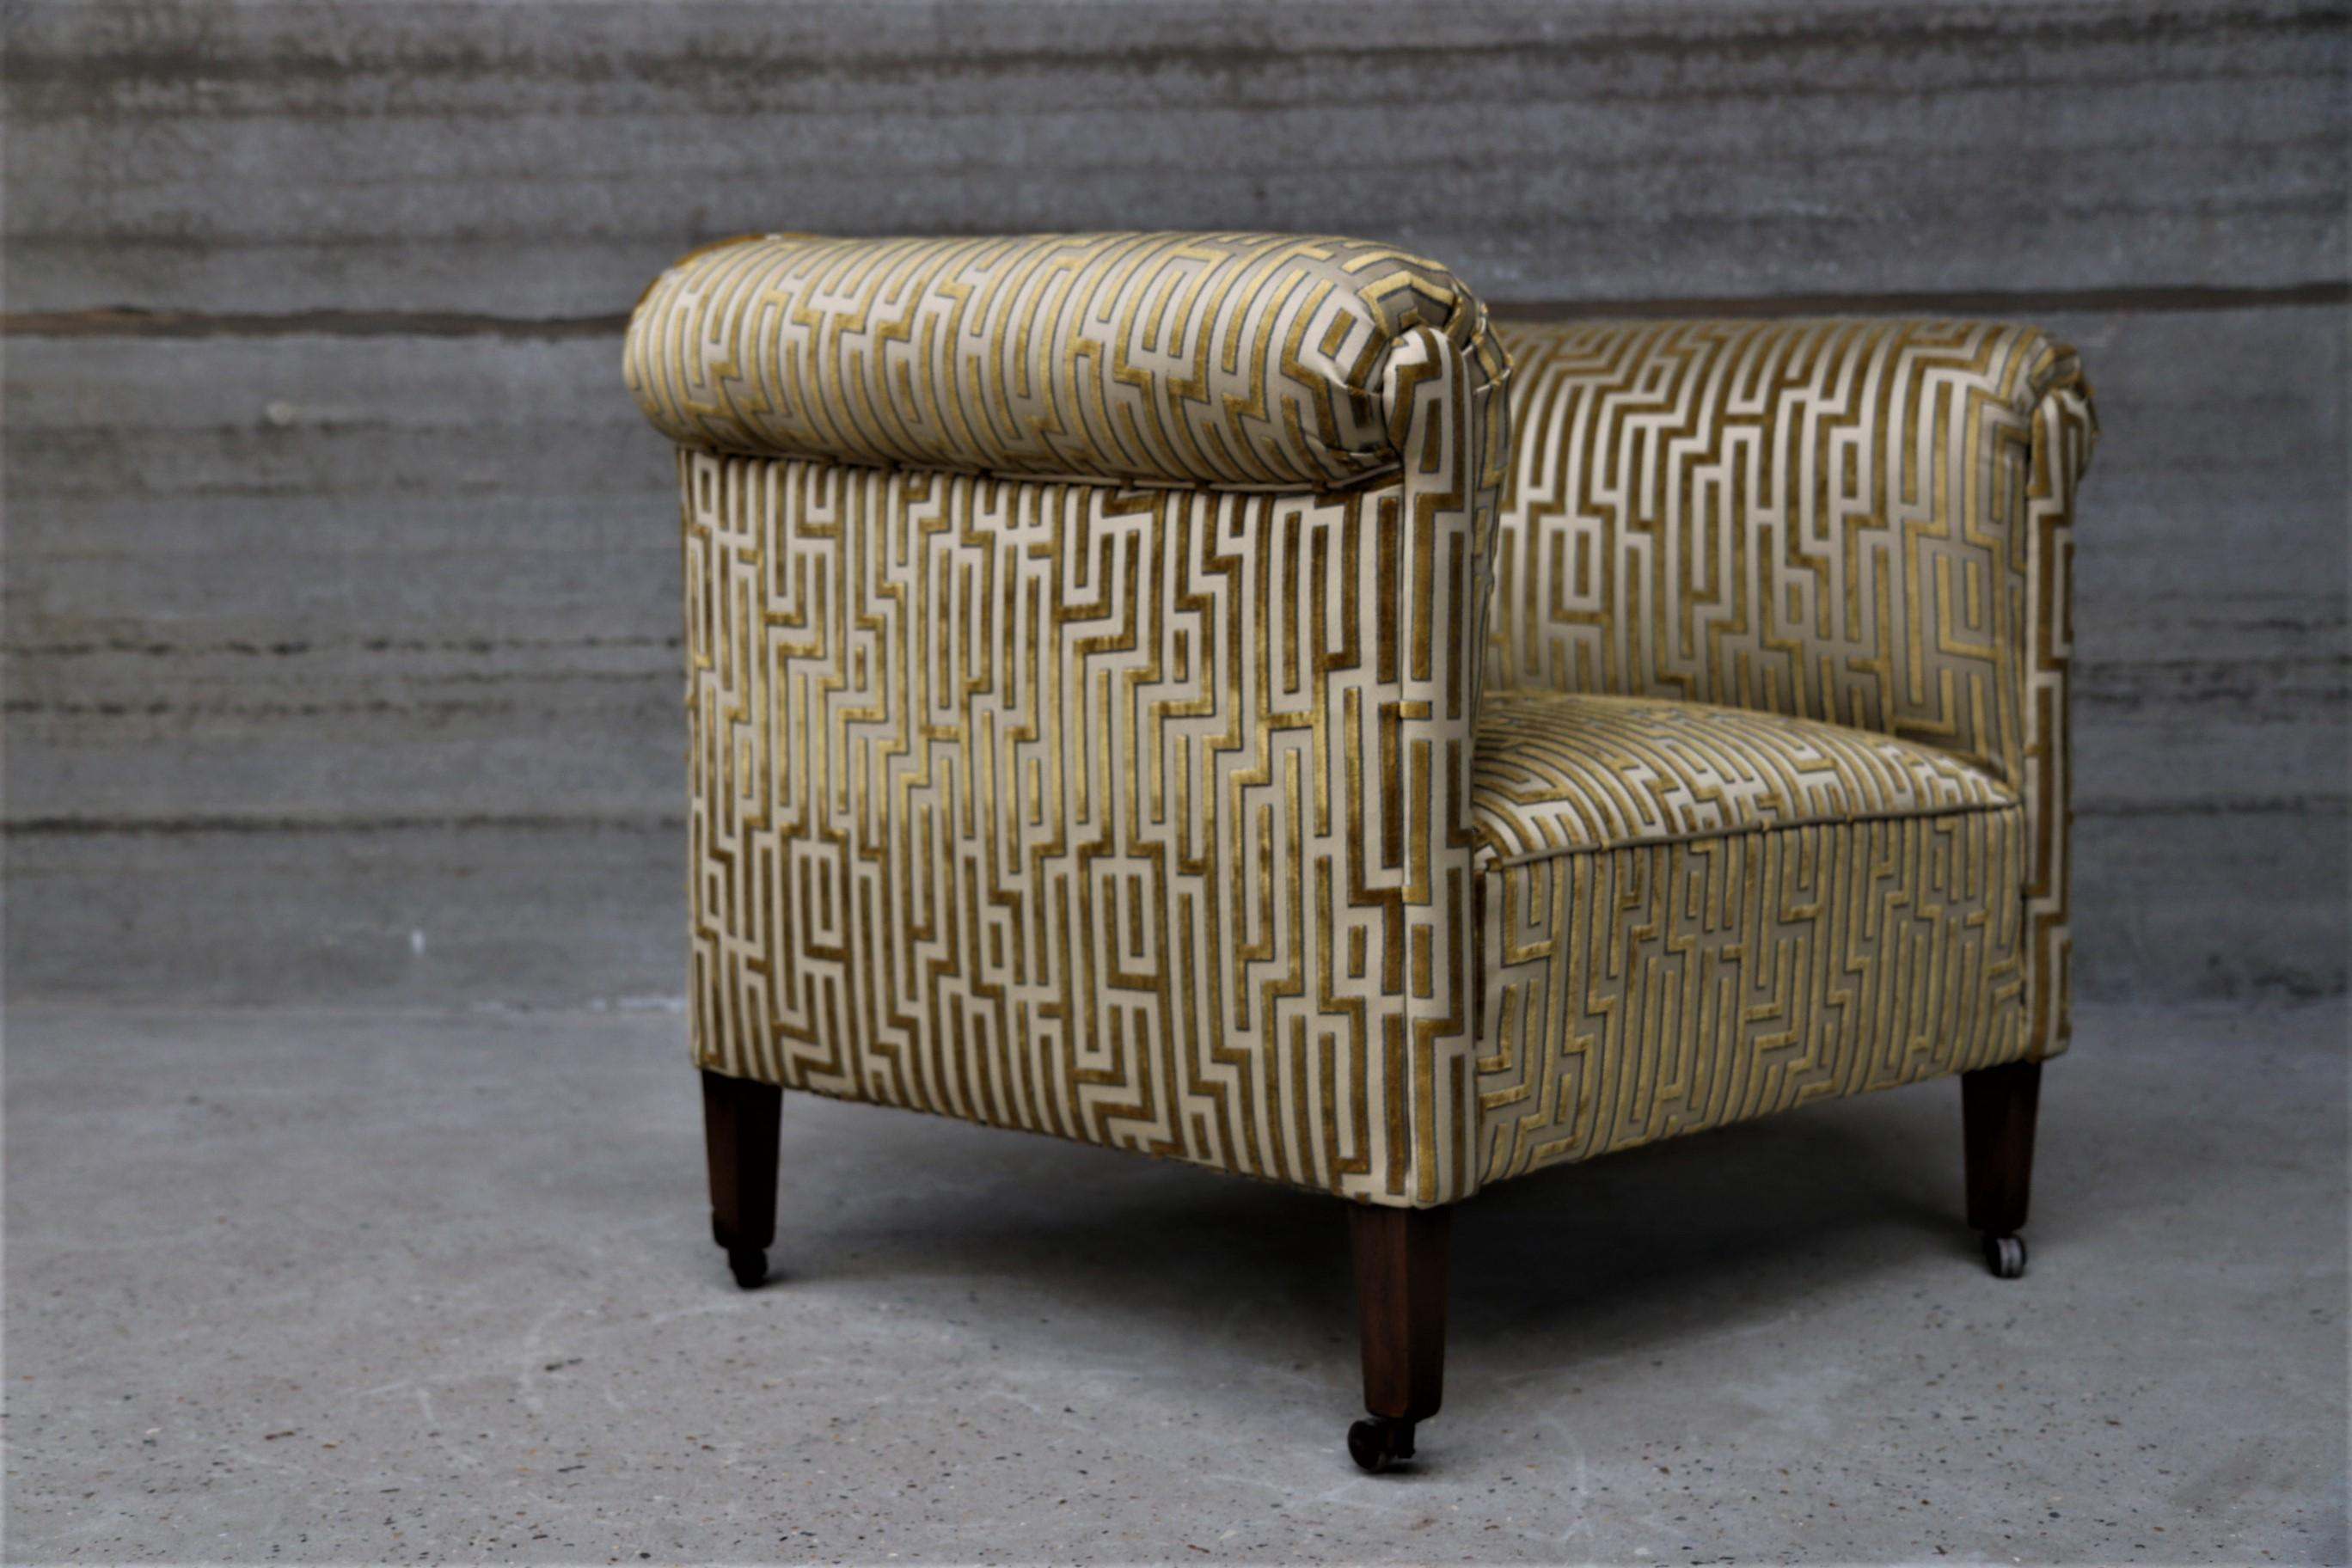 European Art Deco Pair of Extra Large Roller Armchairs Re-Upholstered in Fendi Fabric For Sale